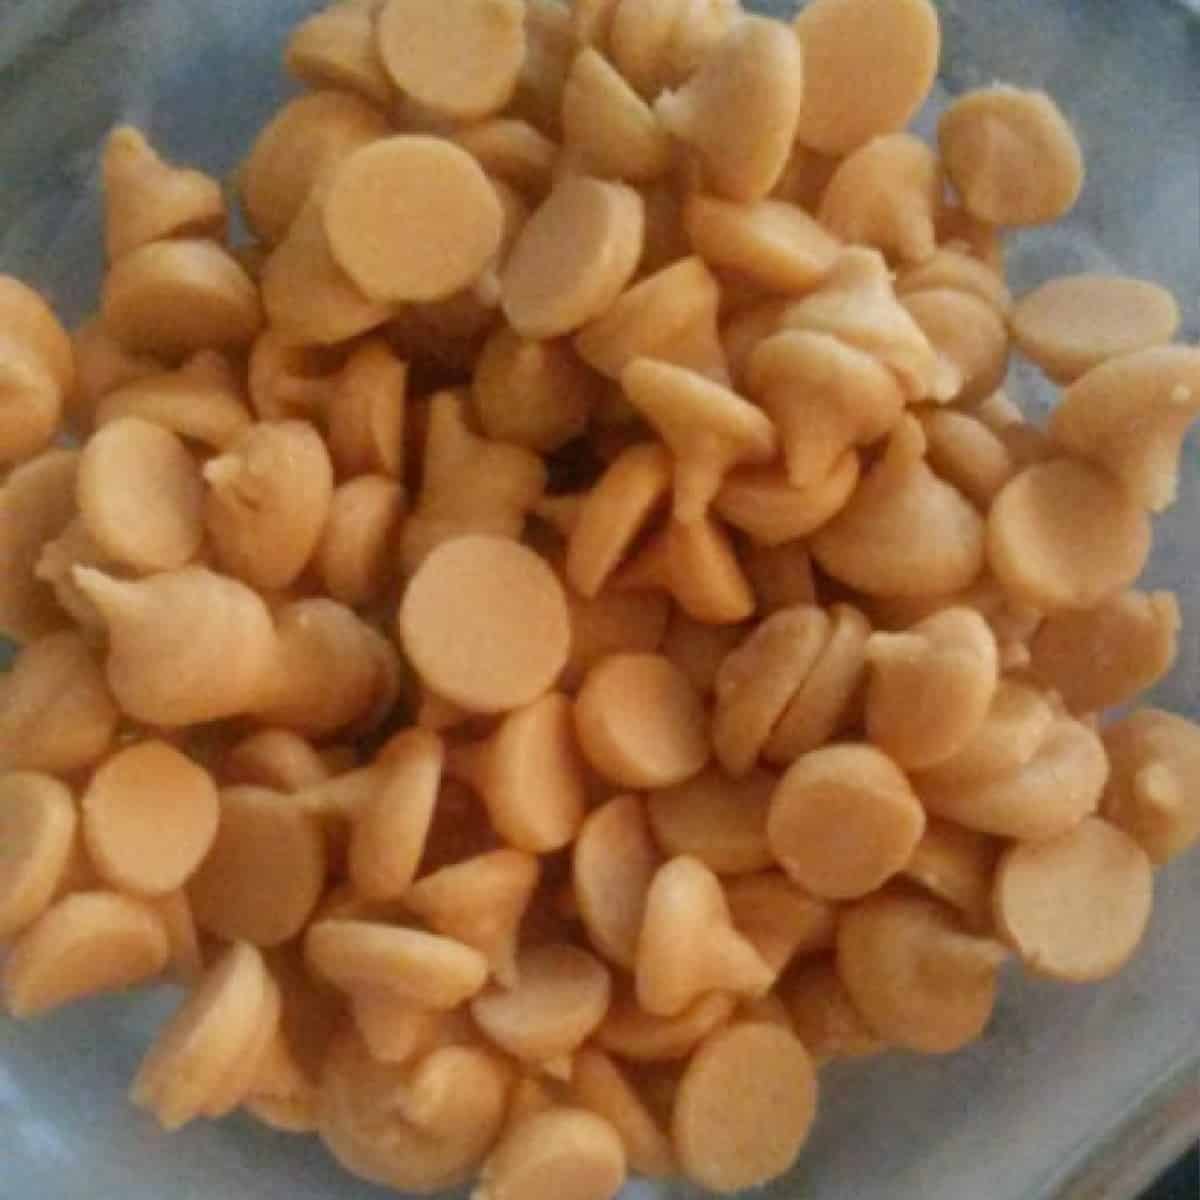 A close-up photo of a bowl of nut butter chips. The chips are small and round, with a light golden brown color and a slightly bumpy texture. Some of the chips are melted, revealing their creamy nut butter interior.